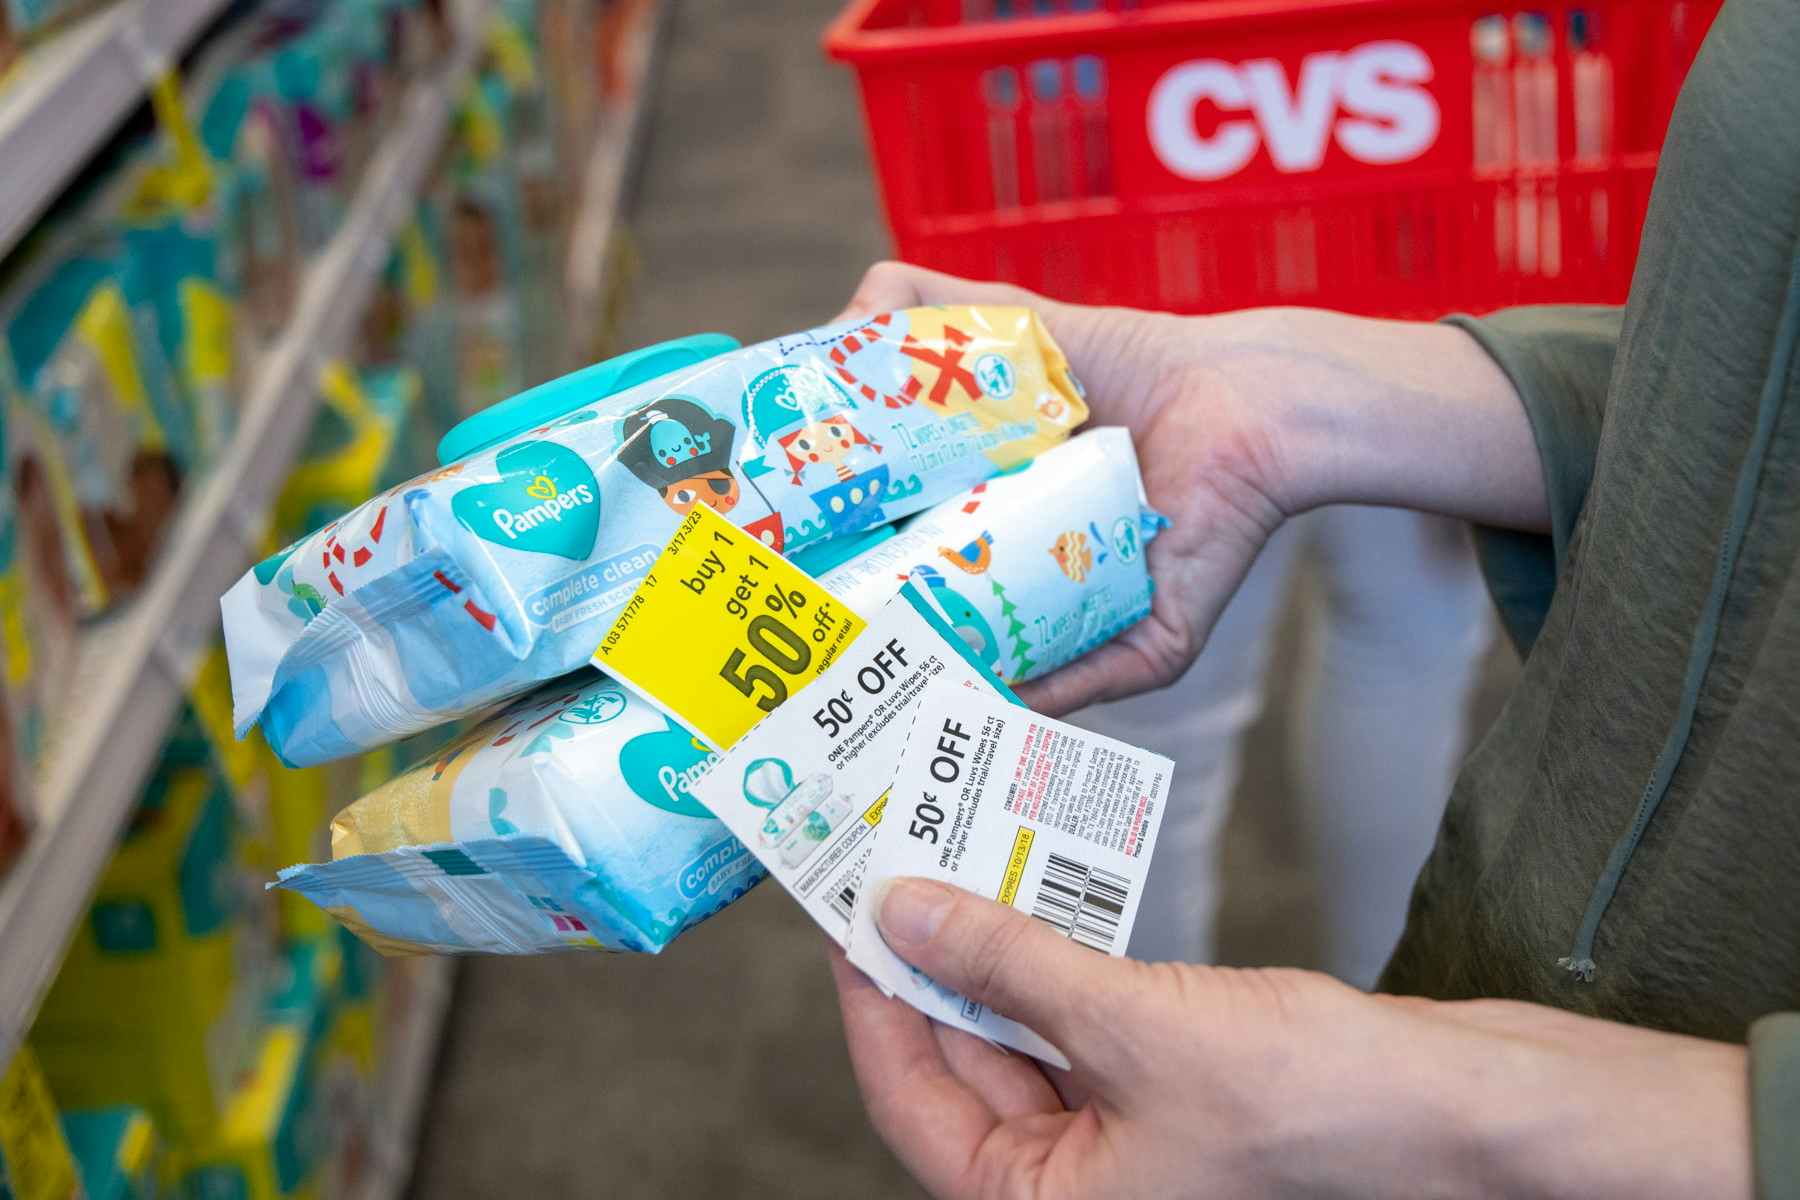 A woman holding two packs of pampers baby wipes with two coupons. A CVS basked it visible in the background.